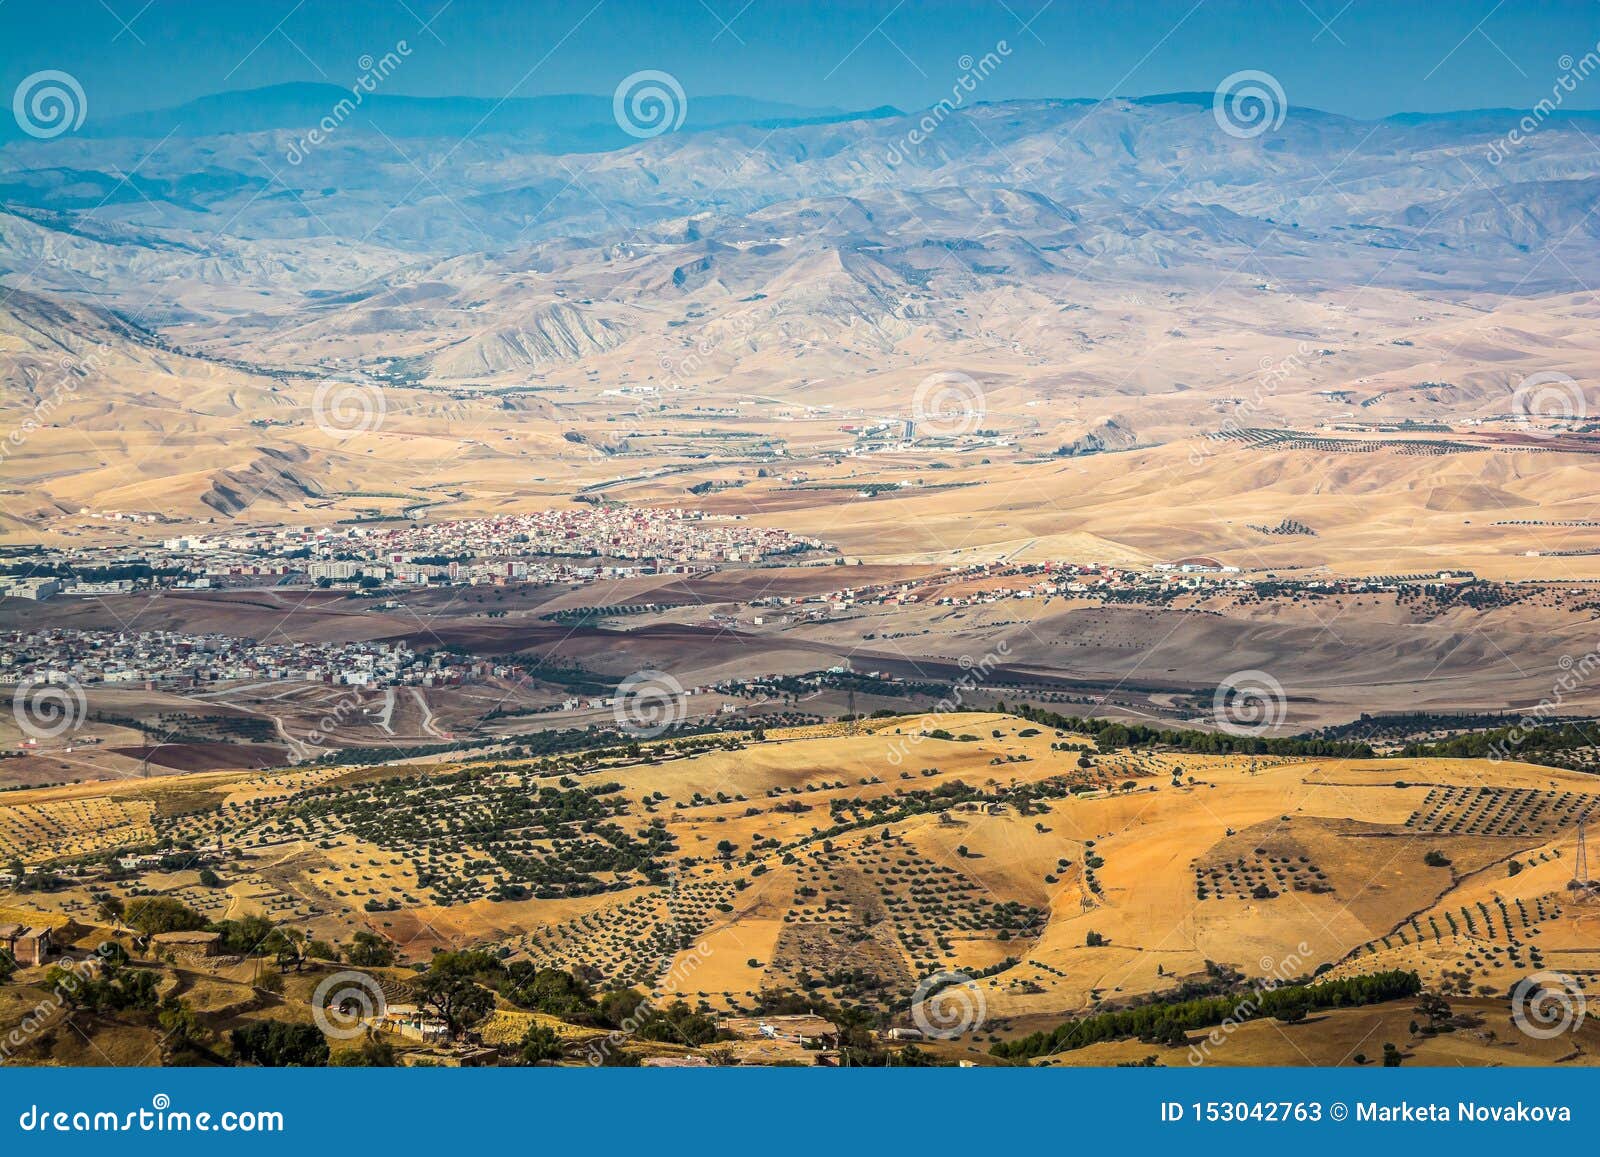 panoramic view on the city of taza in morocco of national park tazekka